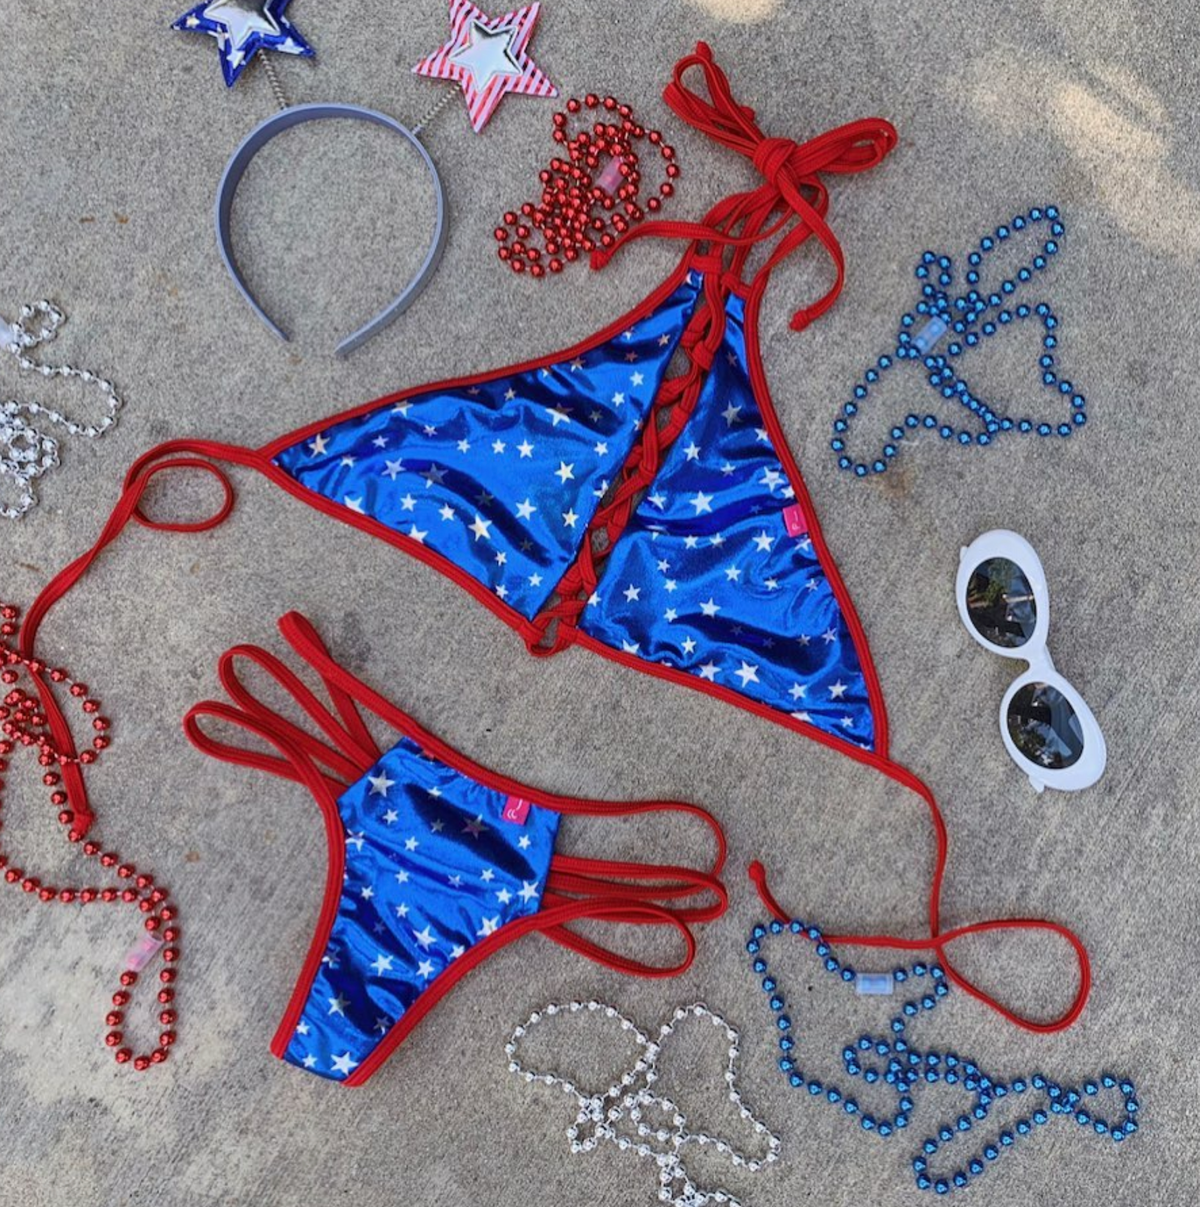 Madison: Lace Up Halter Bathing Suit in Royal w/ White Stars